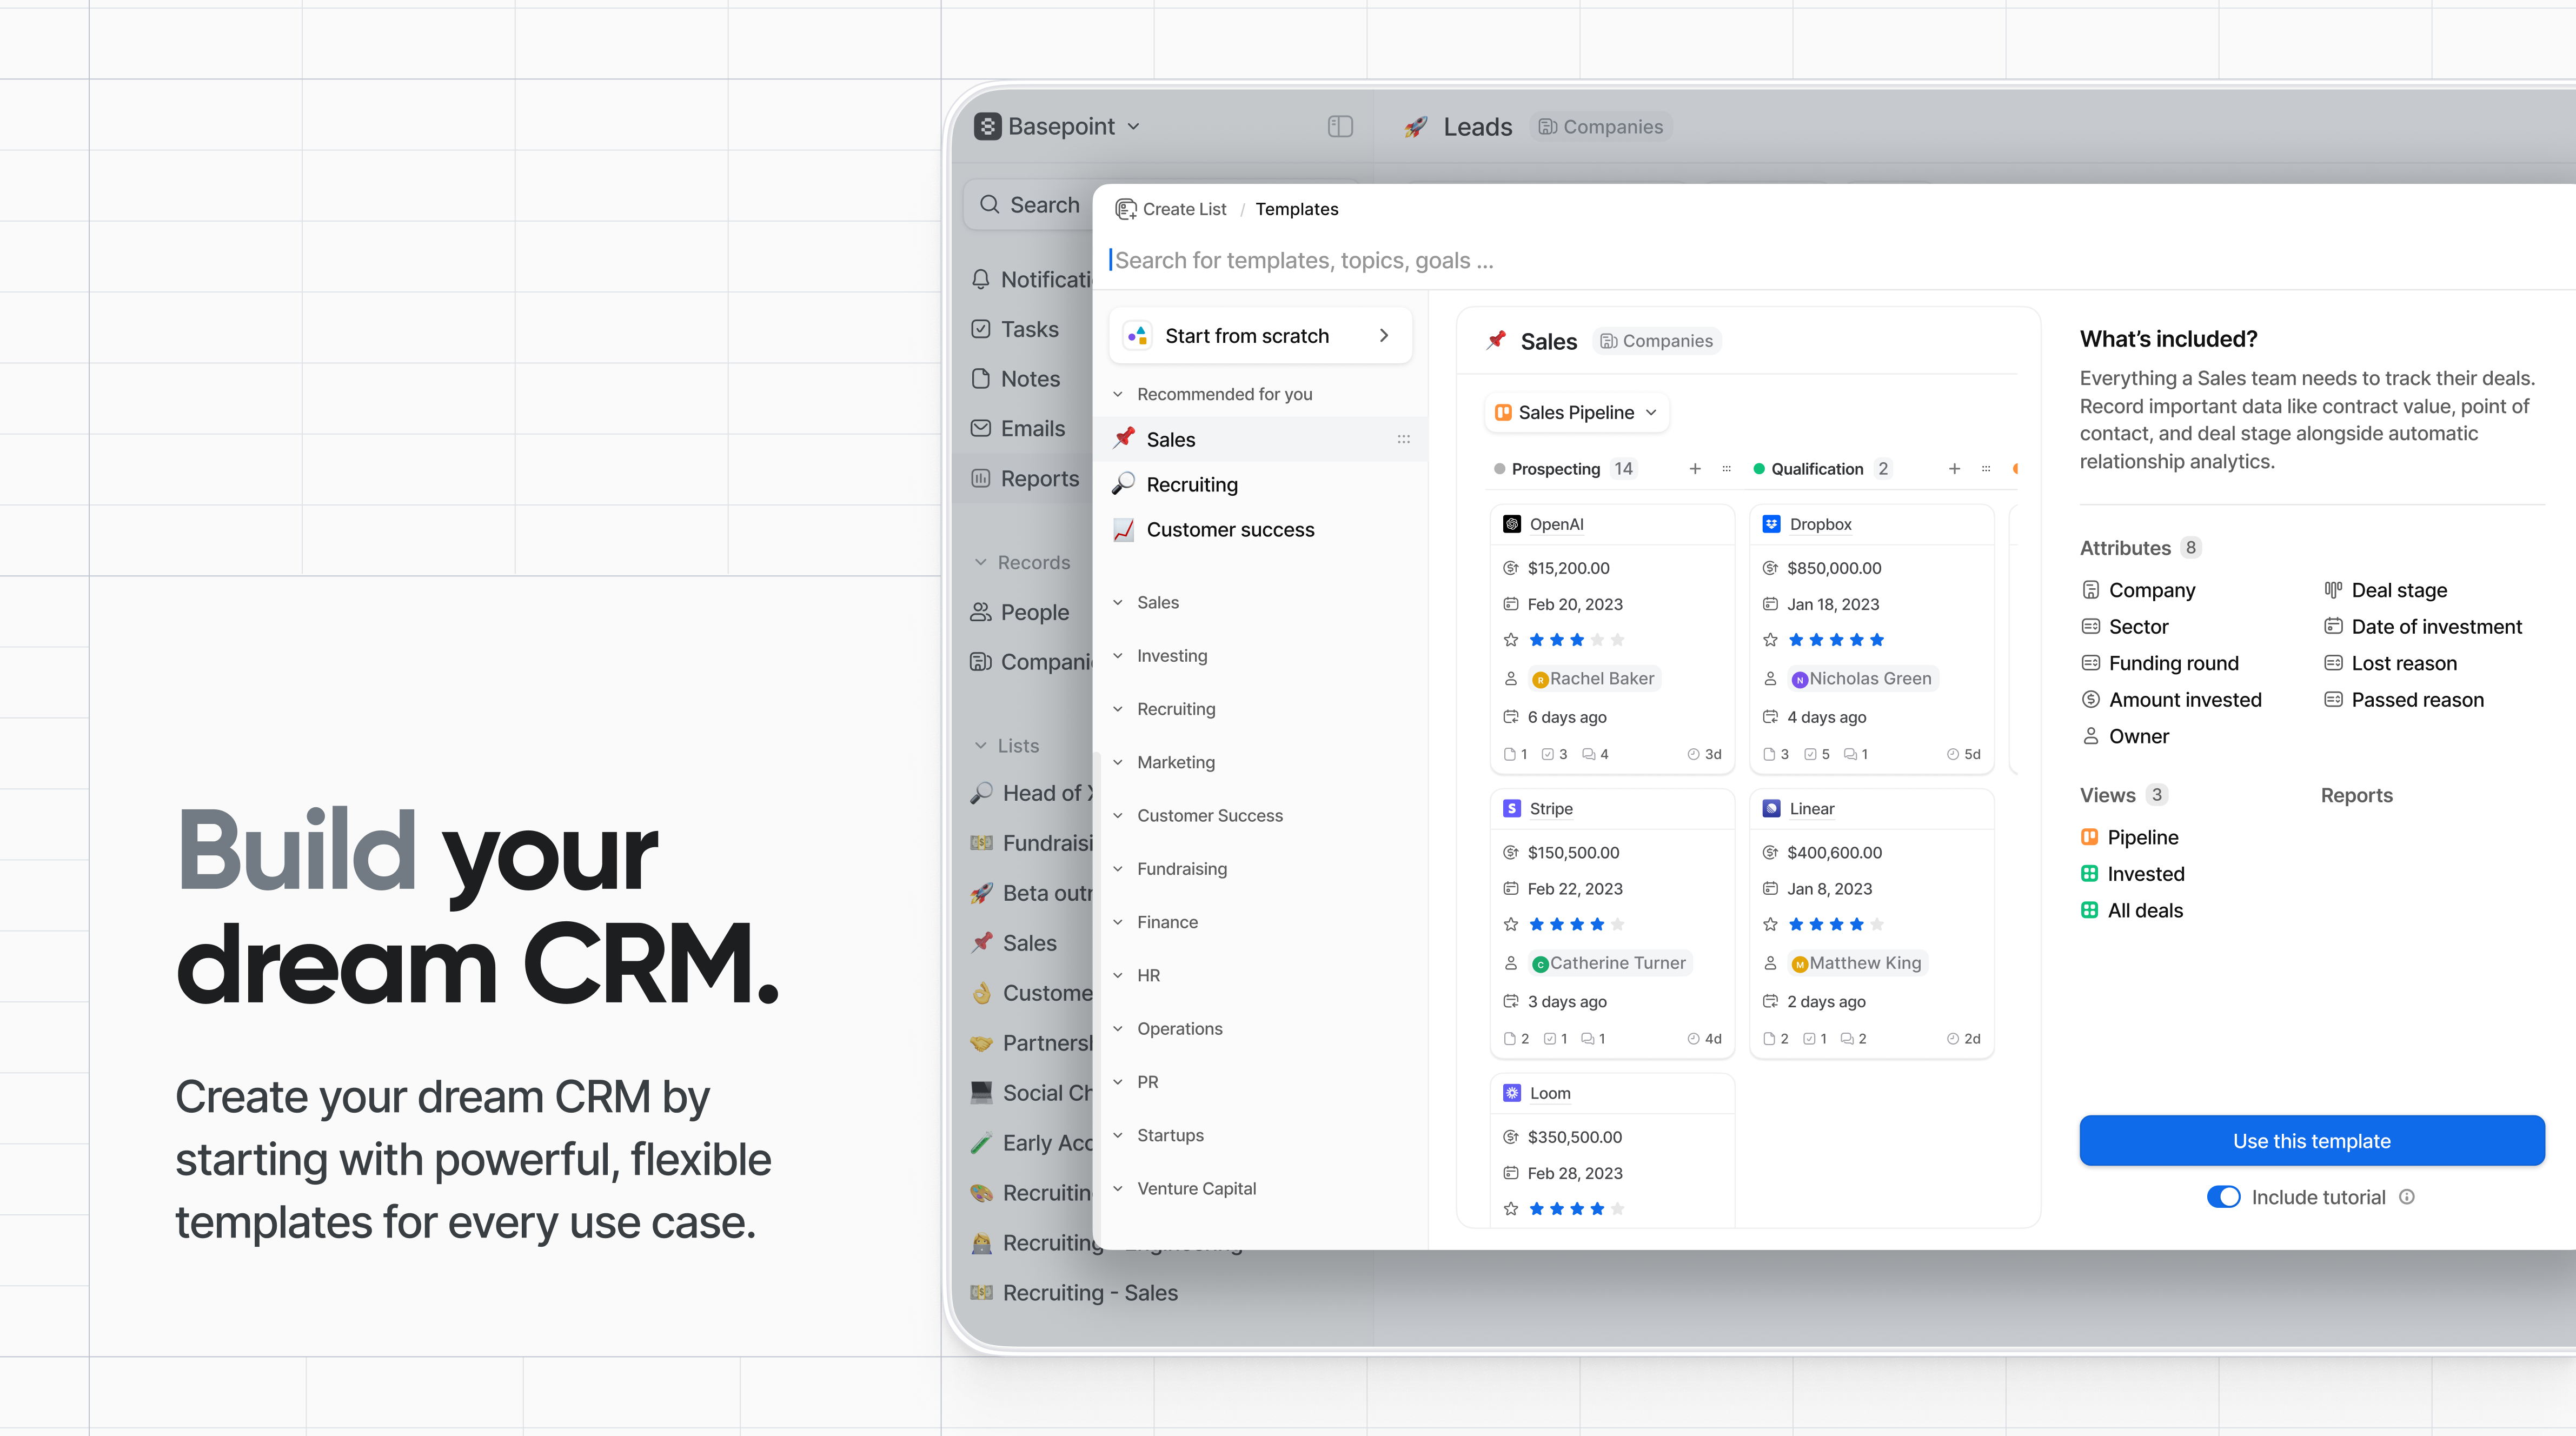 Build your dream CRM: Create your dream CRM by starting with powerful, flexible templates for every use case.